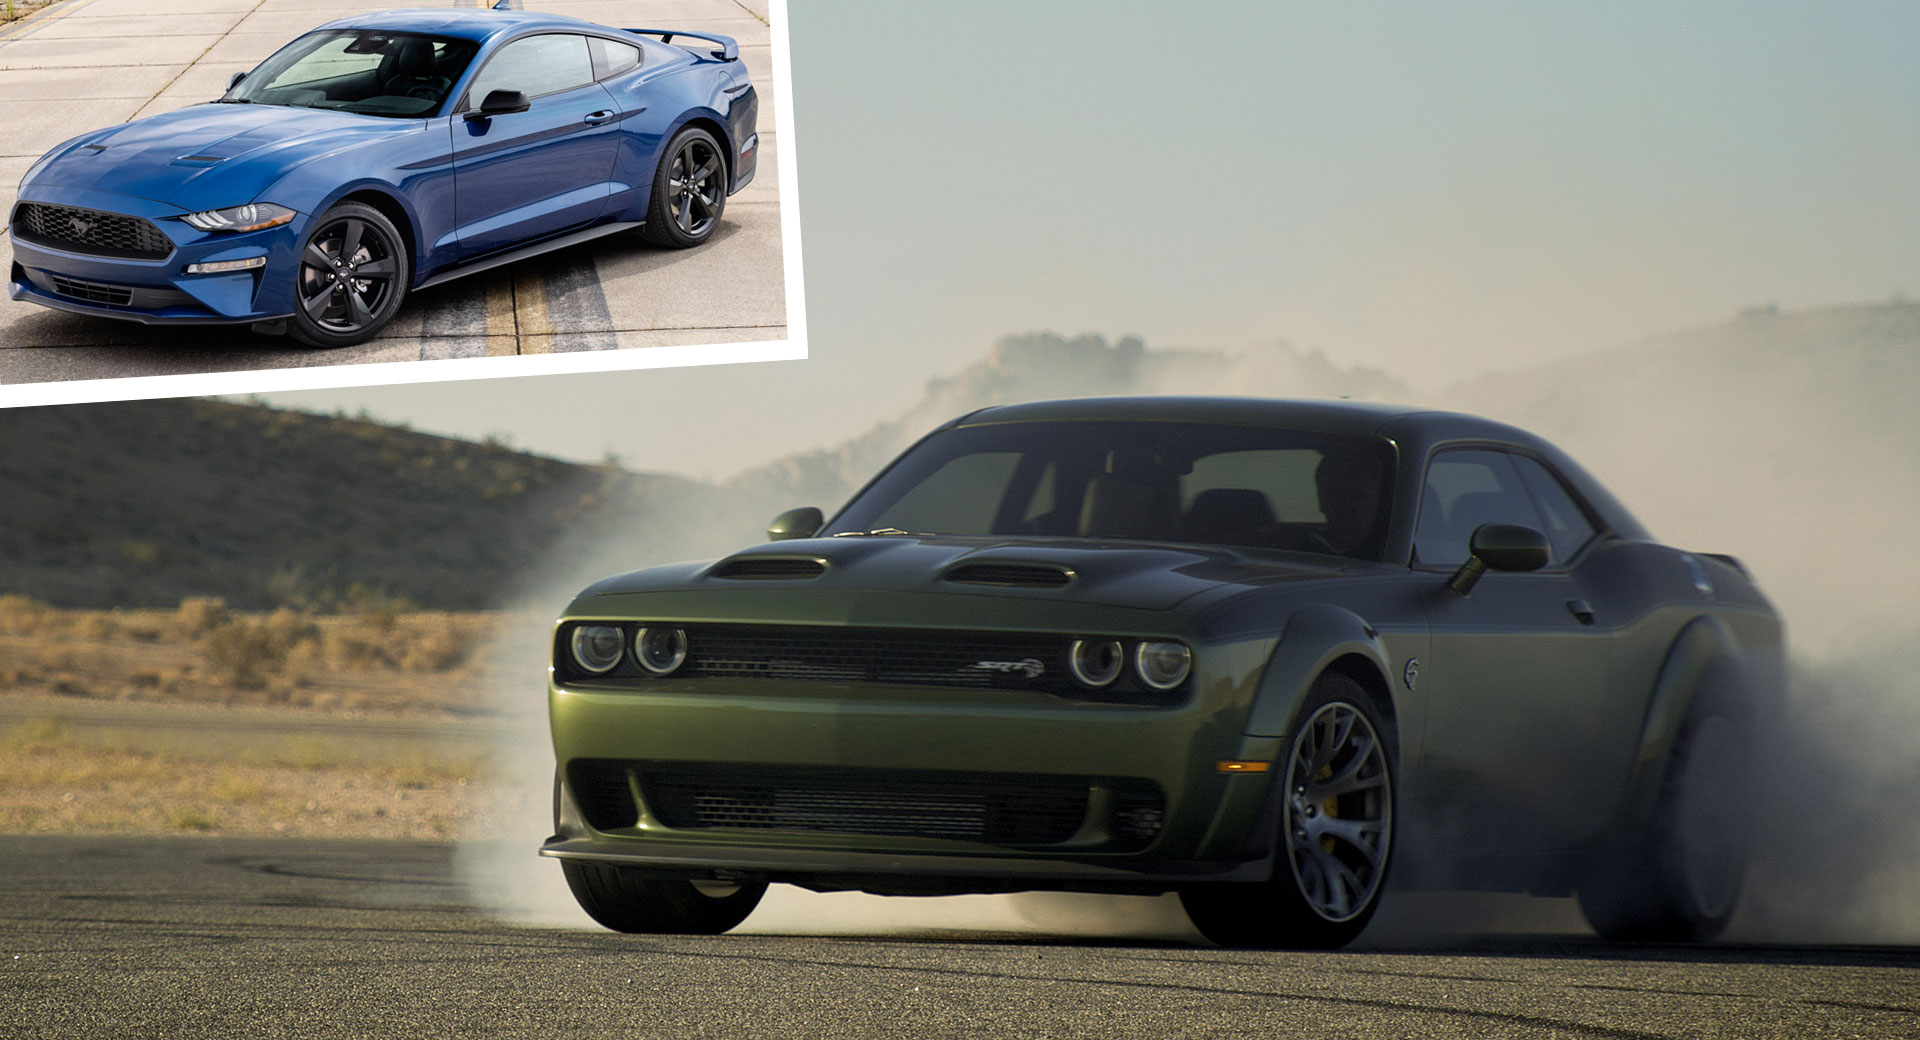 The Dodge Challenger And Ford Mustang Are Neck And Neck As Solely 562 Gross sales Separate The Two